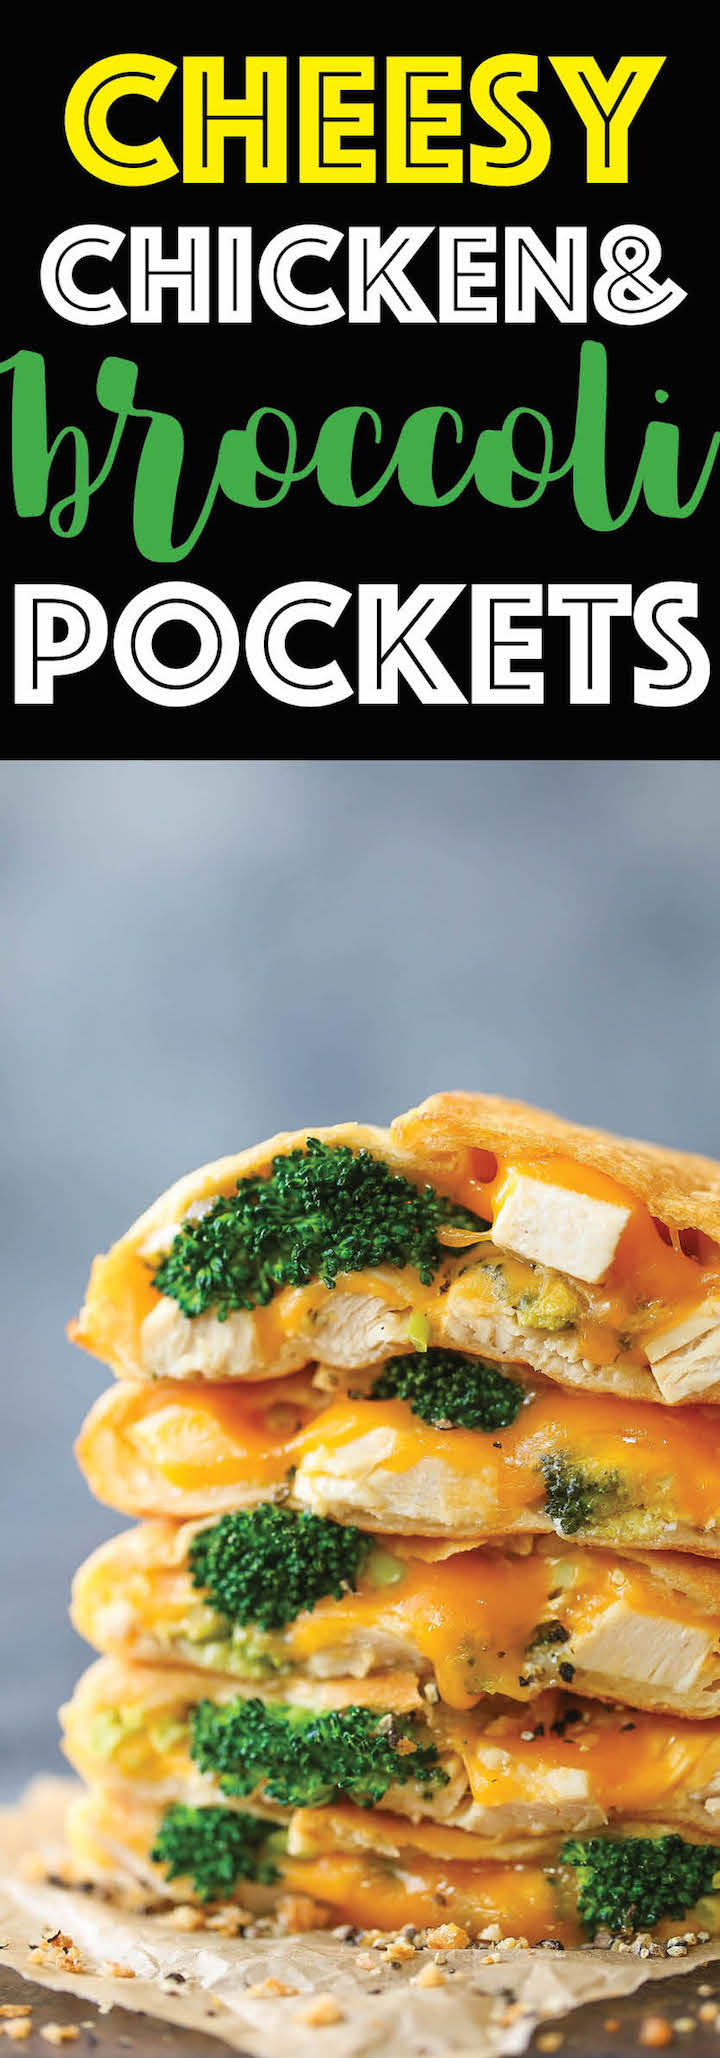 Cheesy Chicken and Broccoli Pockets - Homemade copycat hot pockets filled with ooey gooey melted cheese, chicken and broccoli. Easy and freezer-friendly!